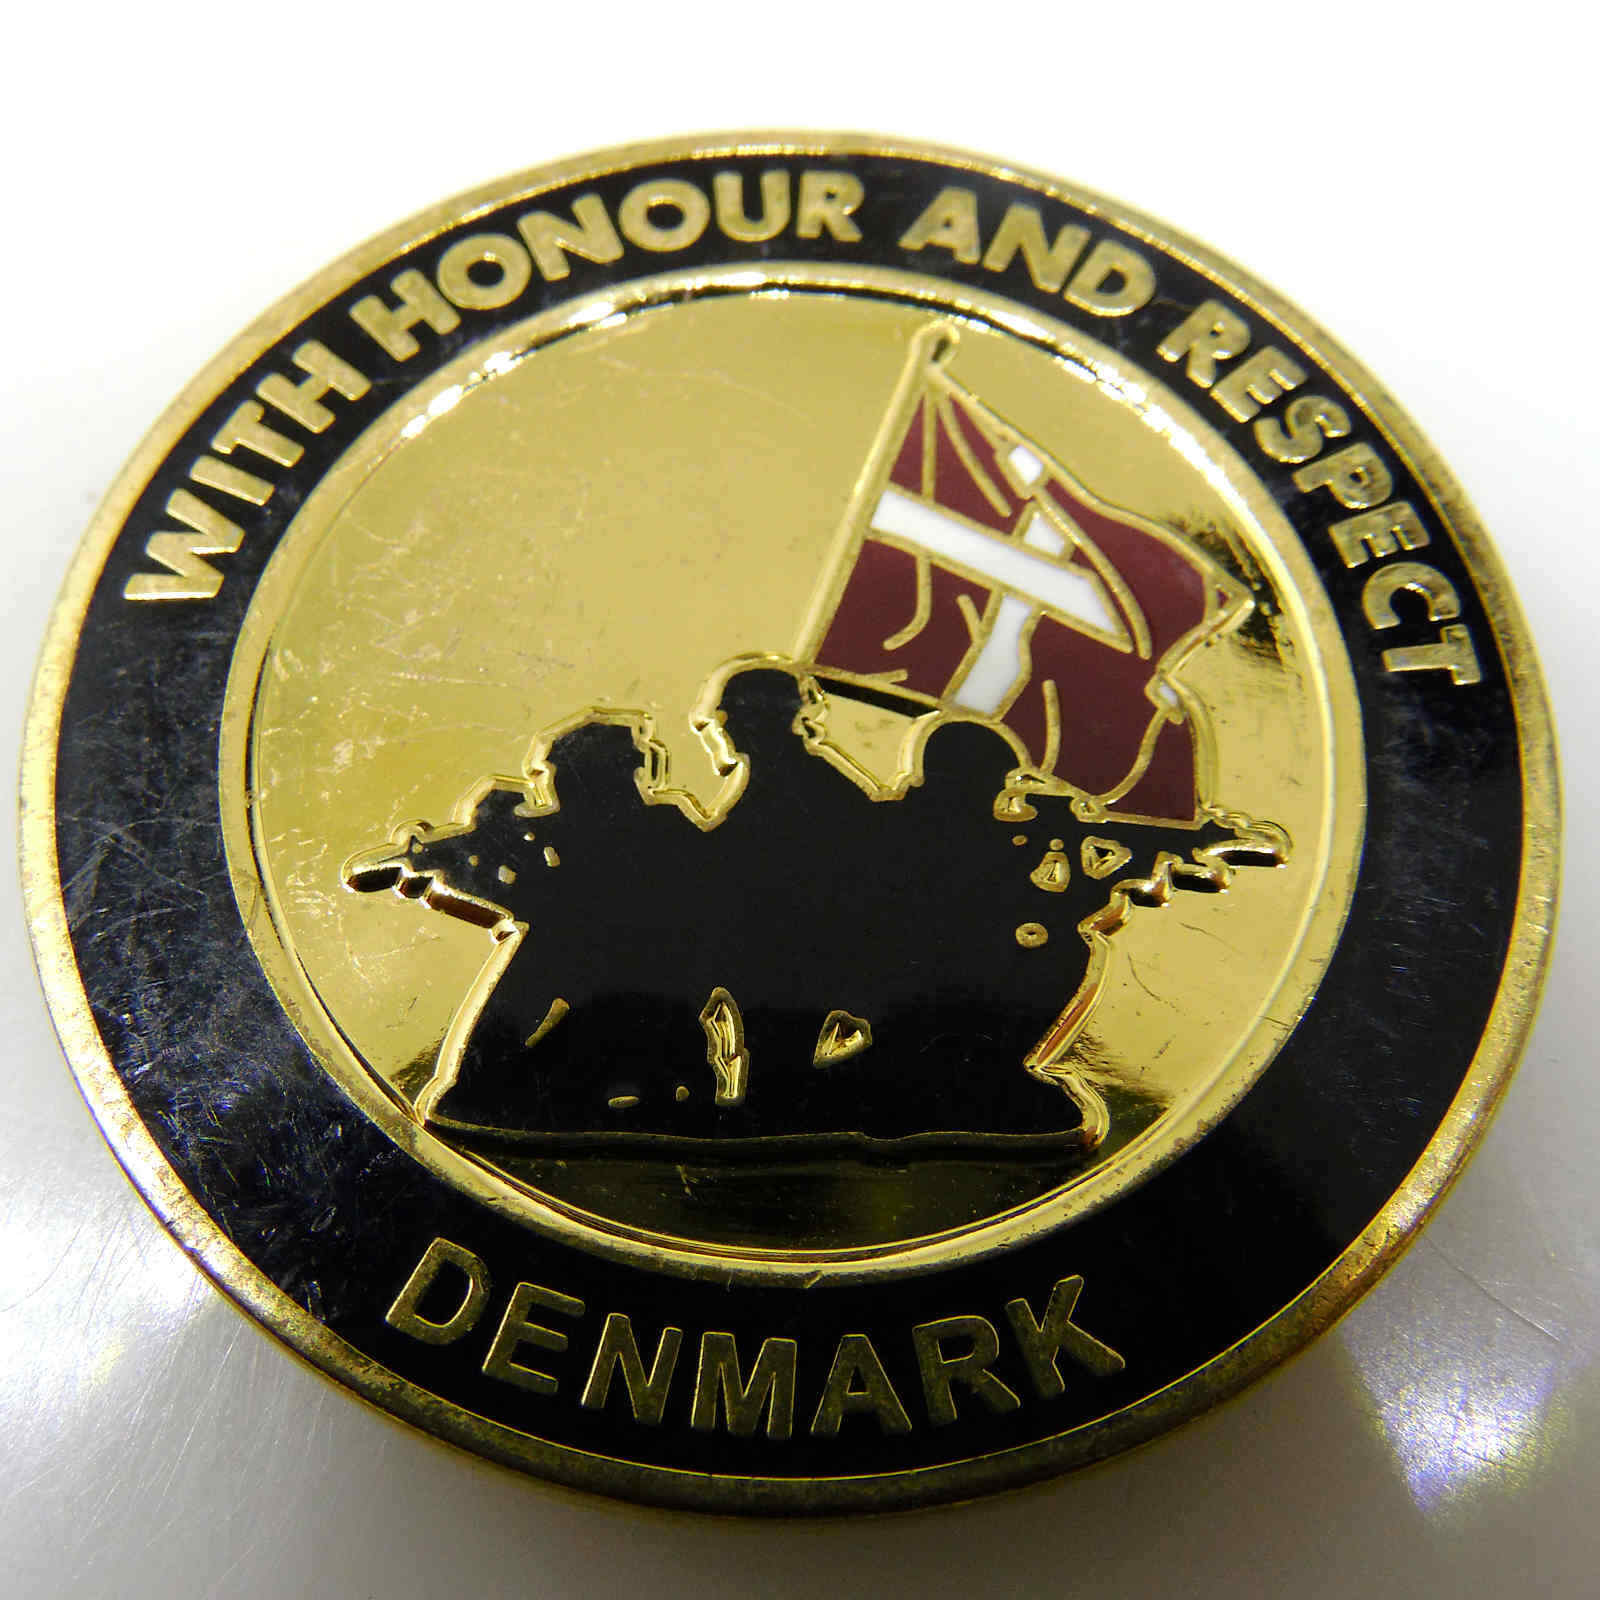 DENMARK ARMY COMMAND CHALLENGE COIN